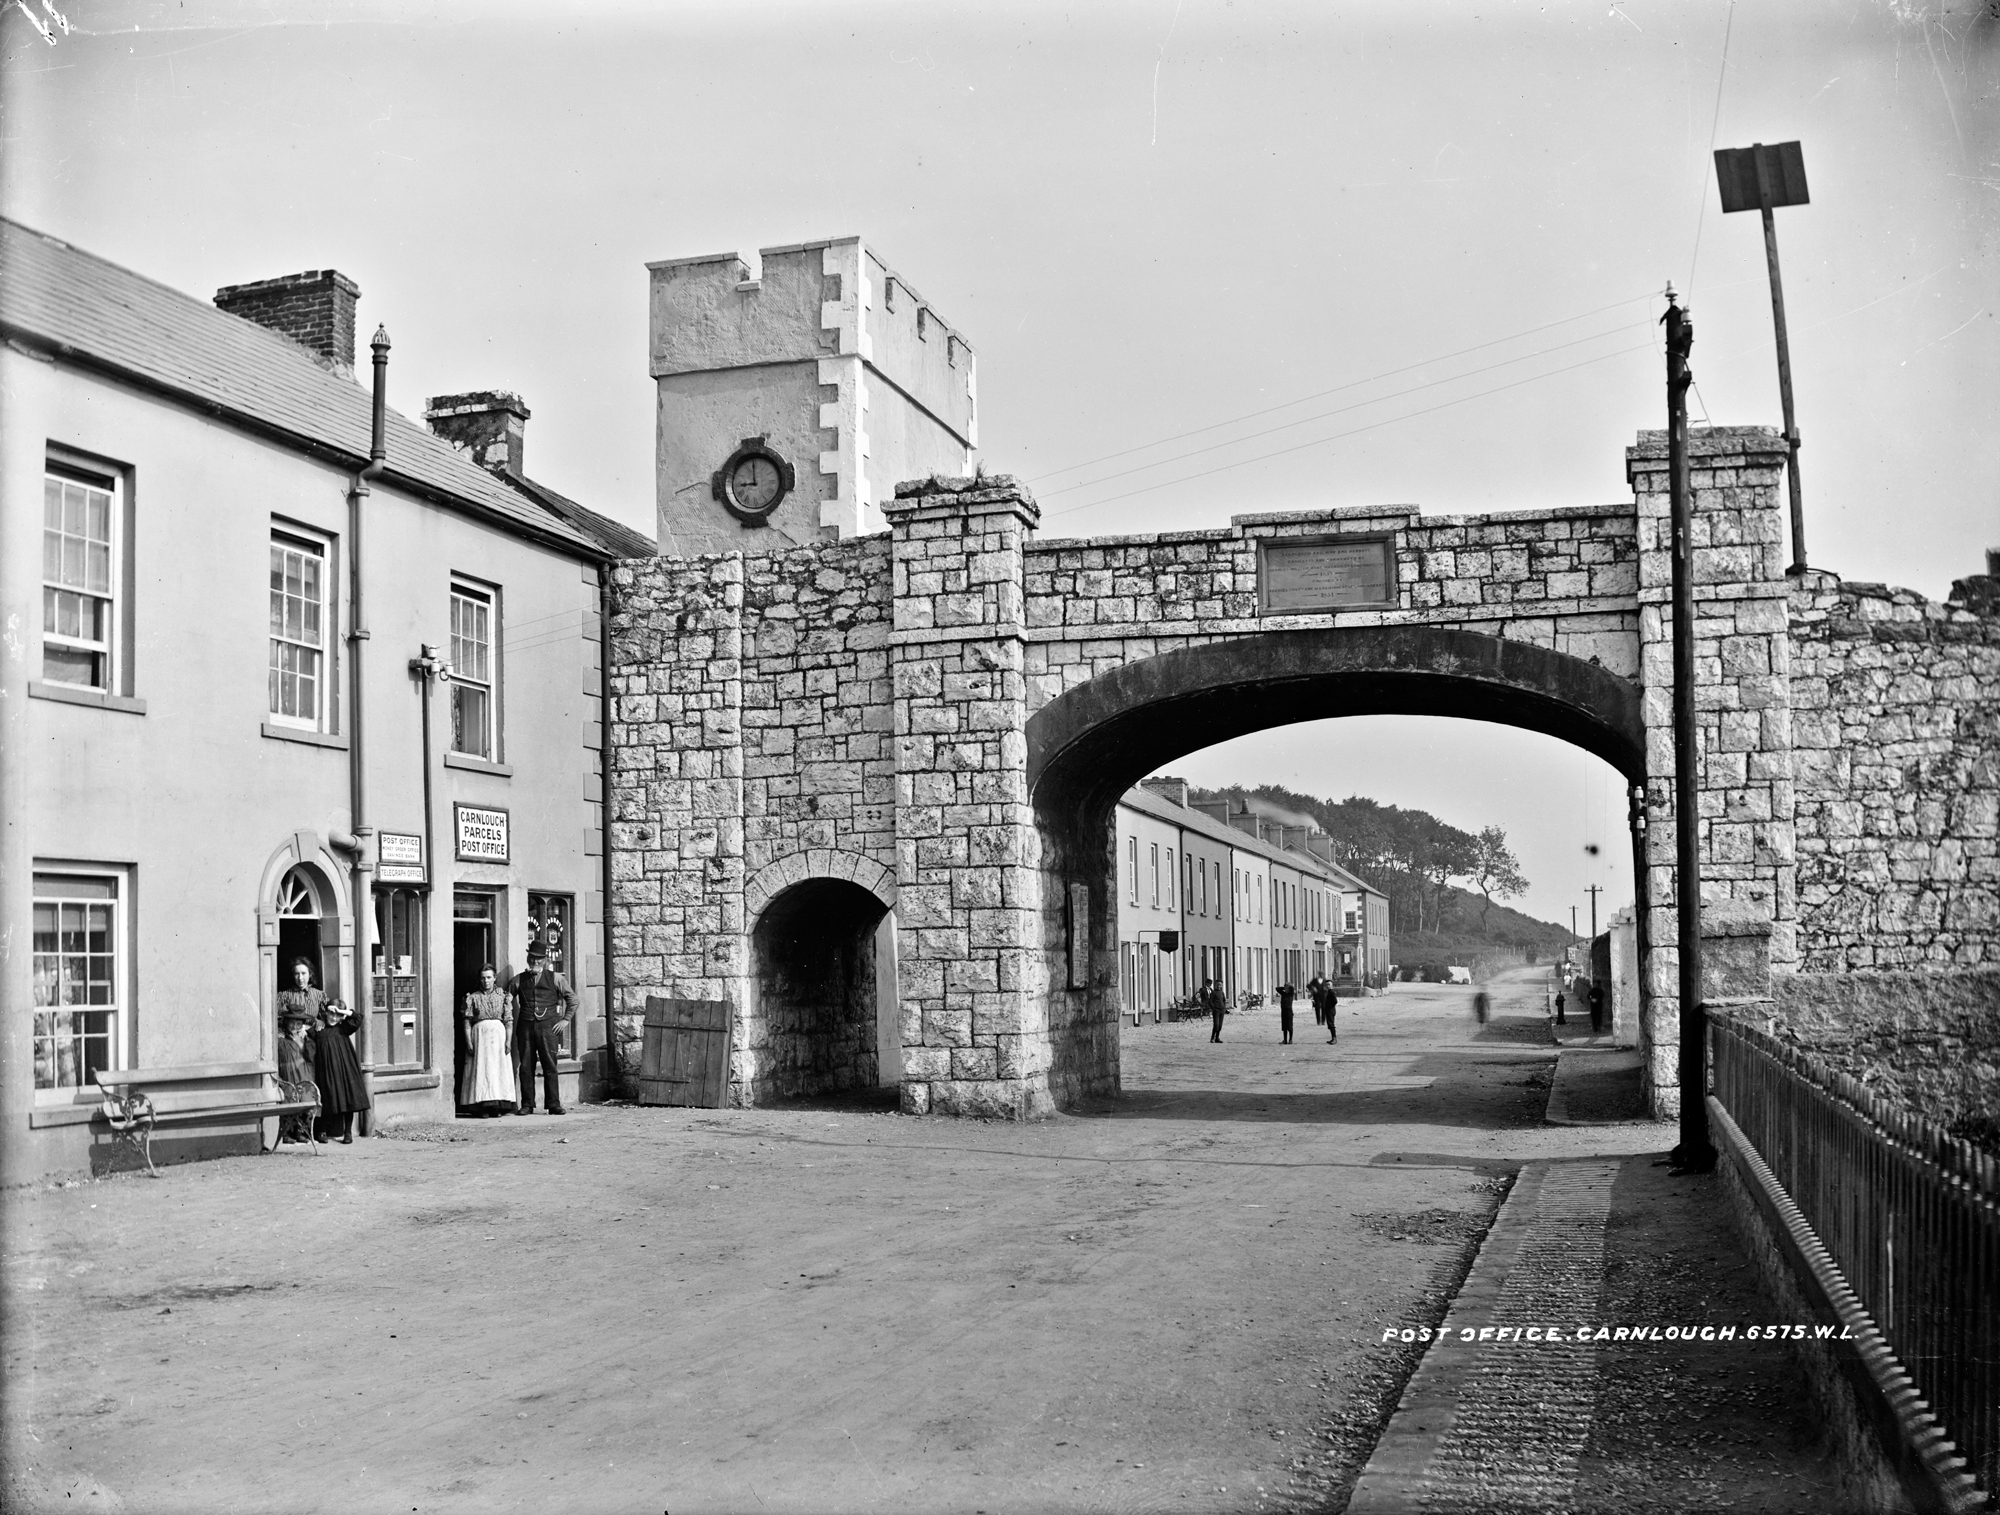 Post Office, Carnlough, Co. Antrim